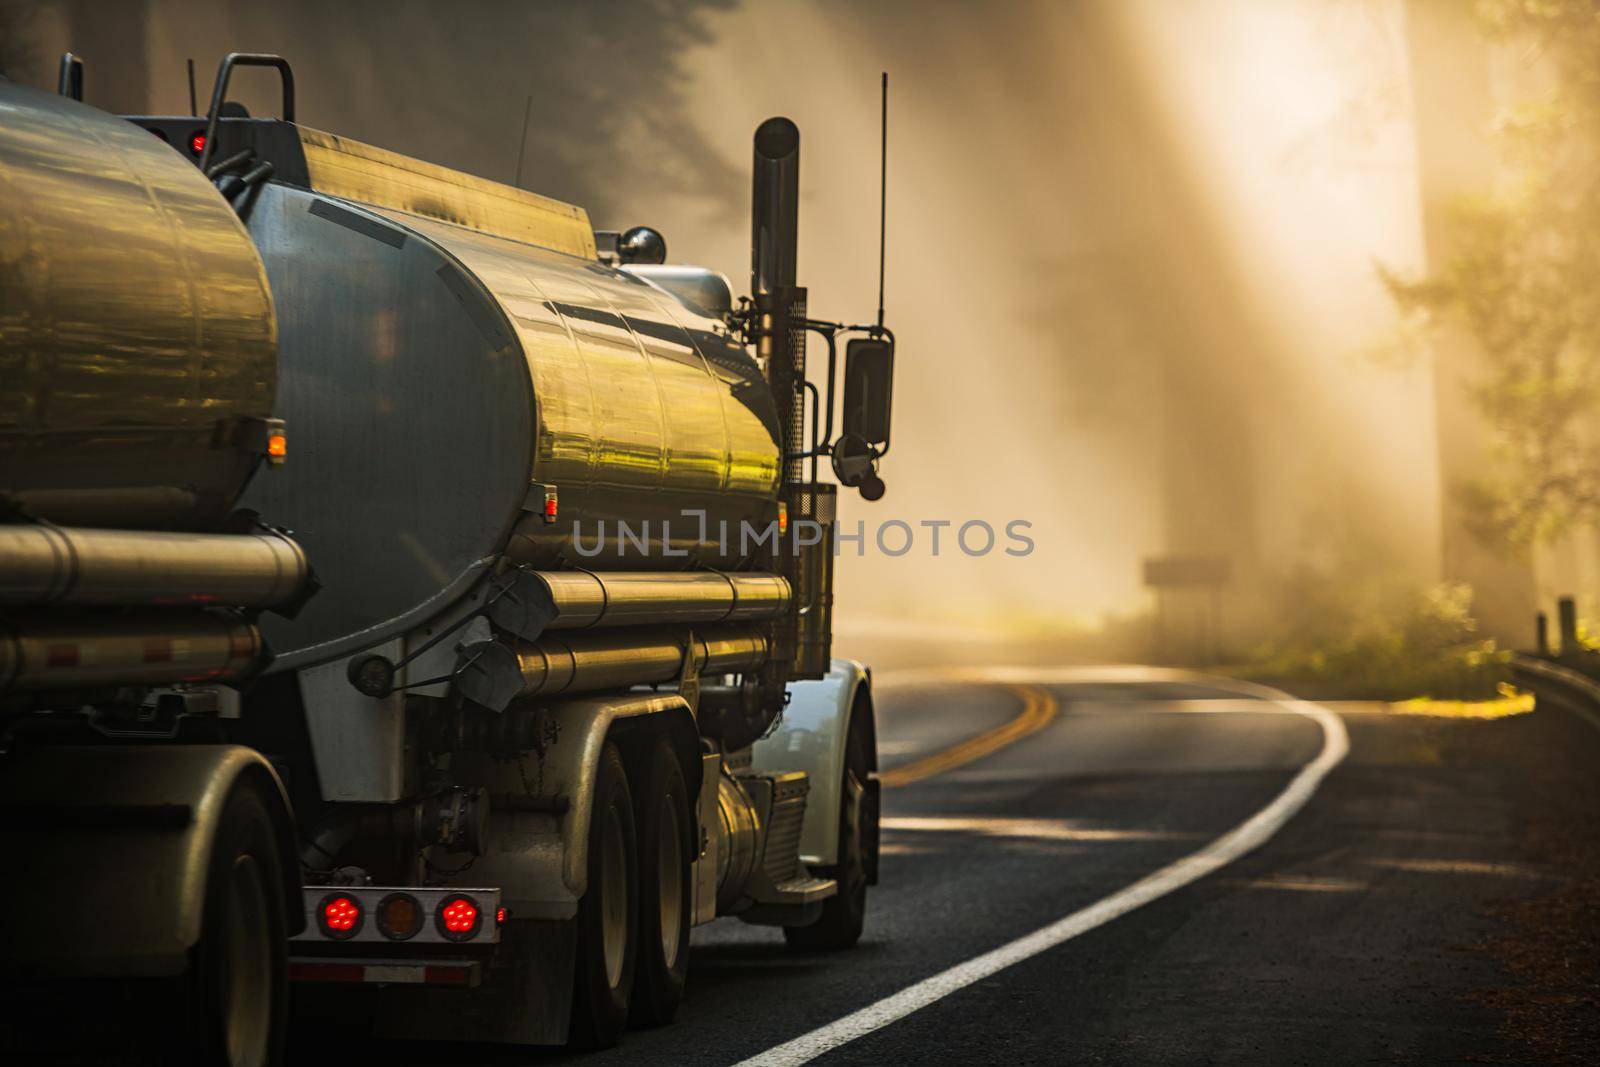 Semi Tank Truck Transporting Fuel on the Scenic Redwood Highway During Foggy Morning Scenery. Northern California Highway 101.